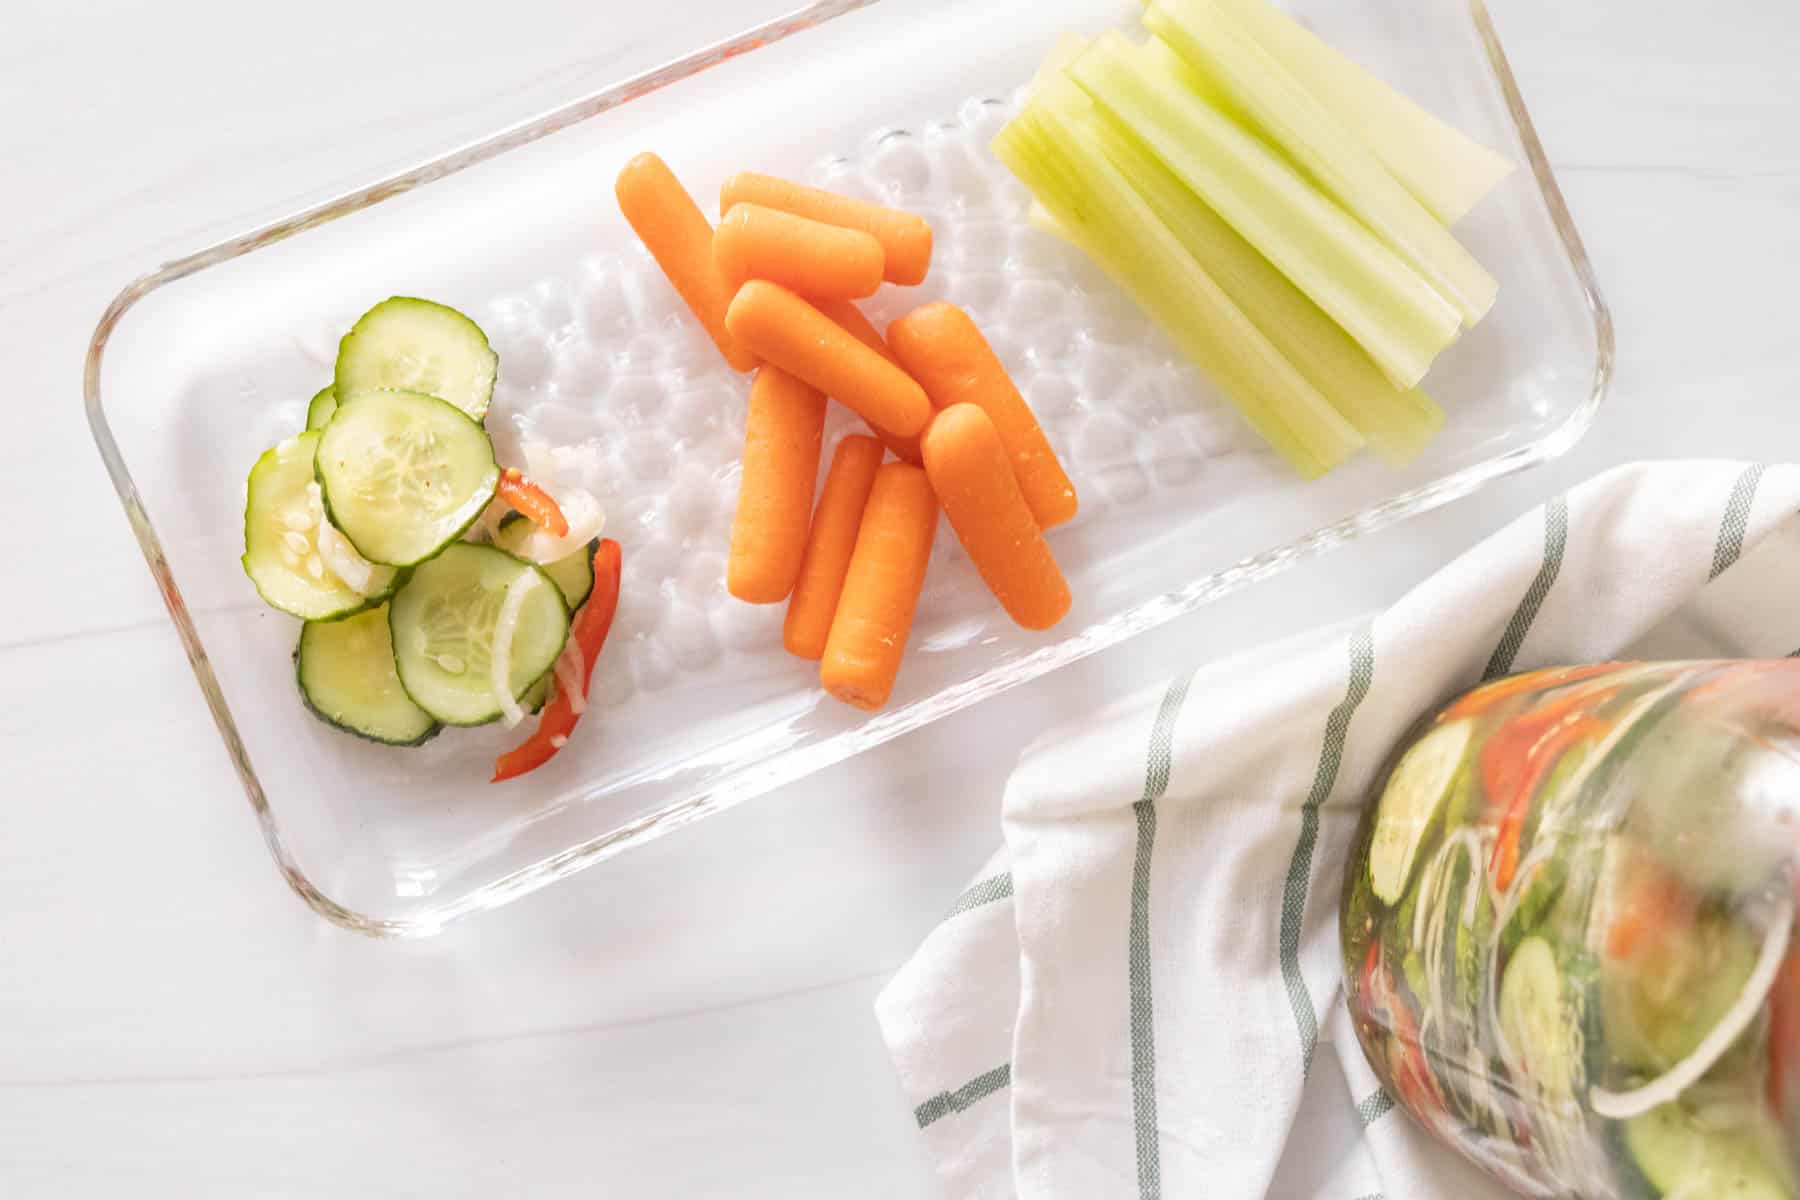 Cucumber pickles, carrots and celery on a glass plate.